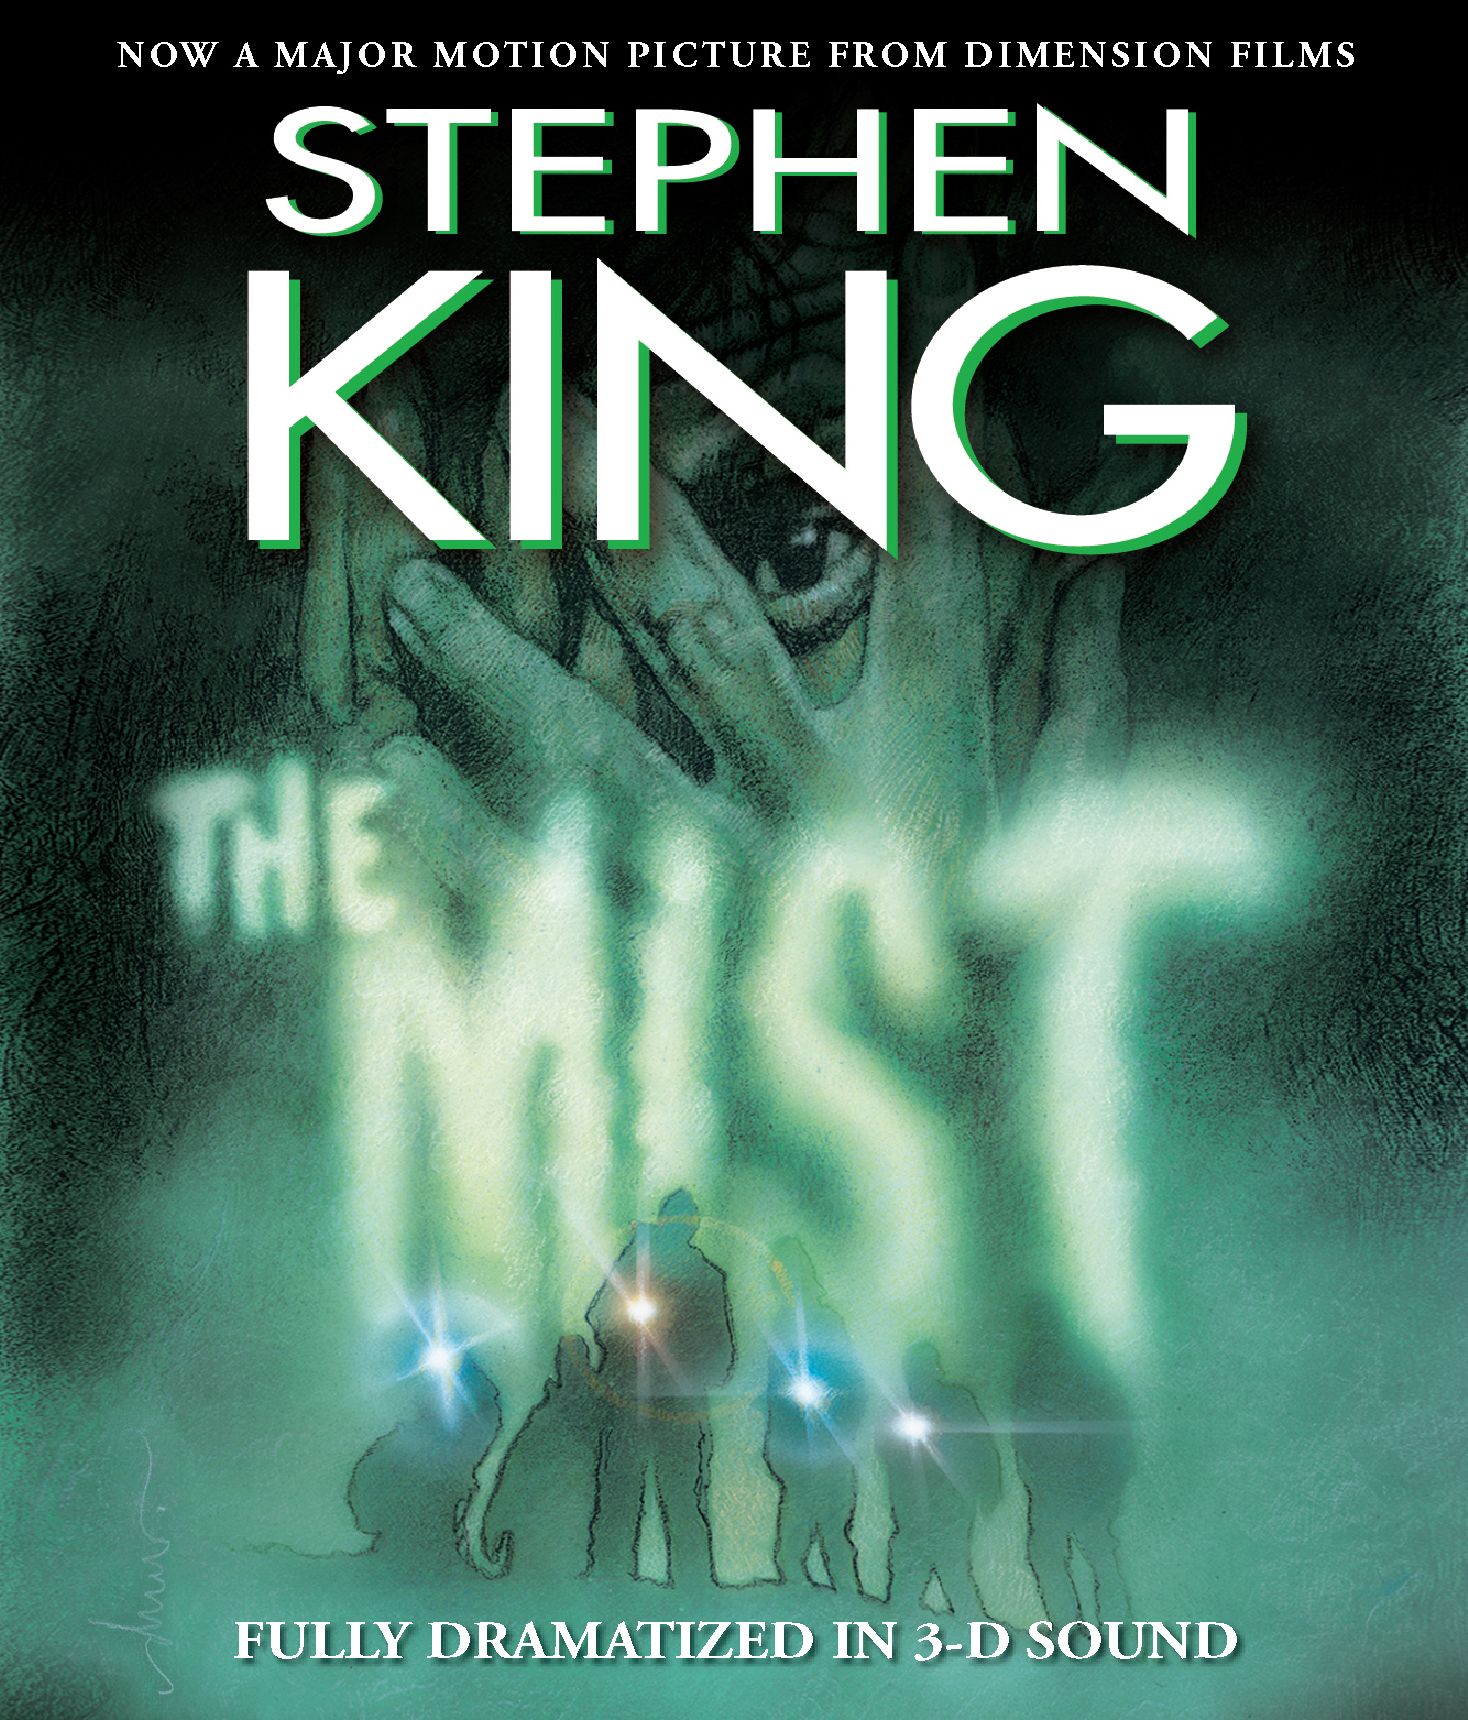 Stephen King's The Mist was adapted to film in 2007; in now 